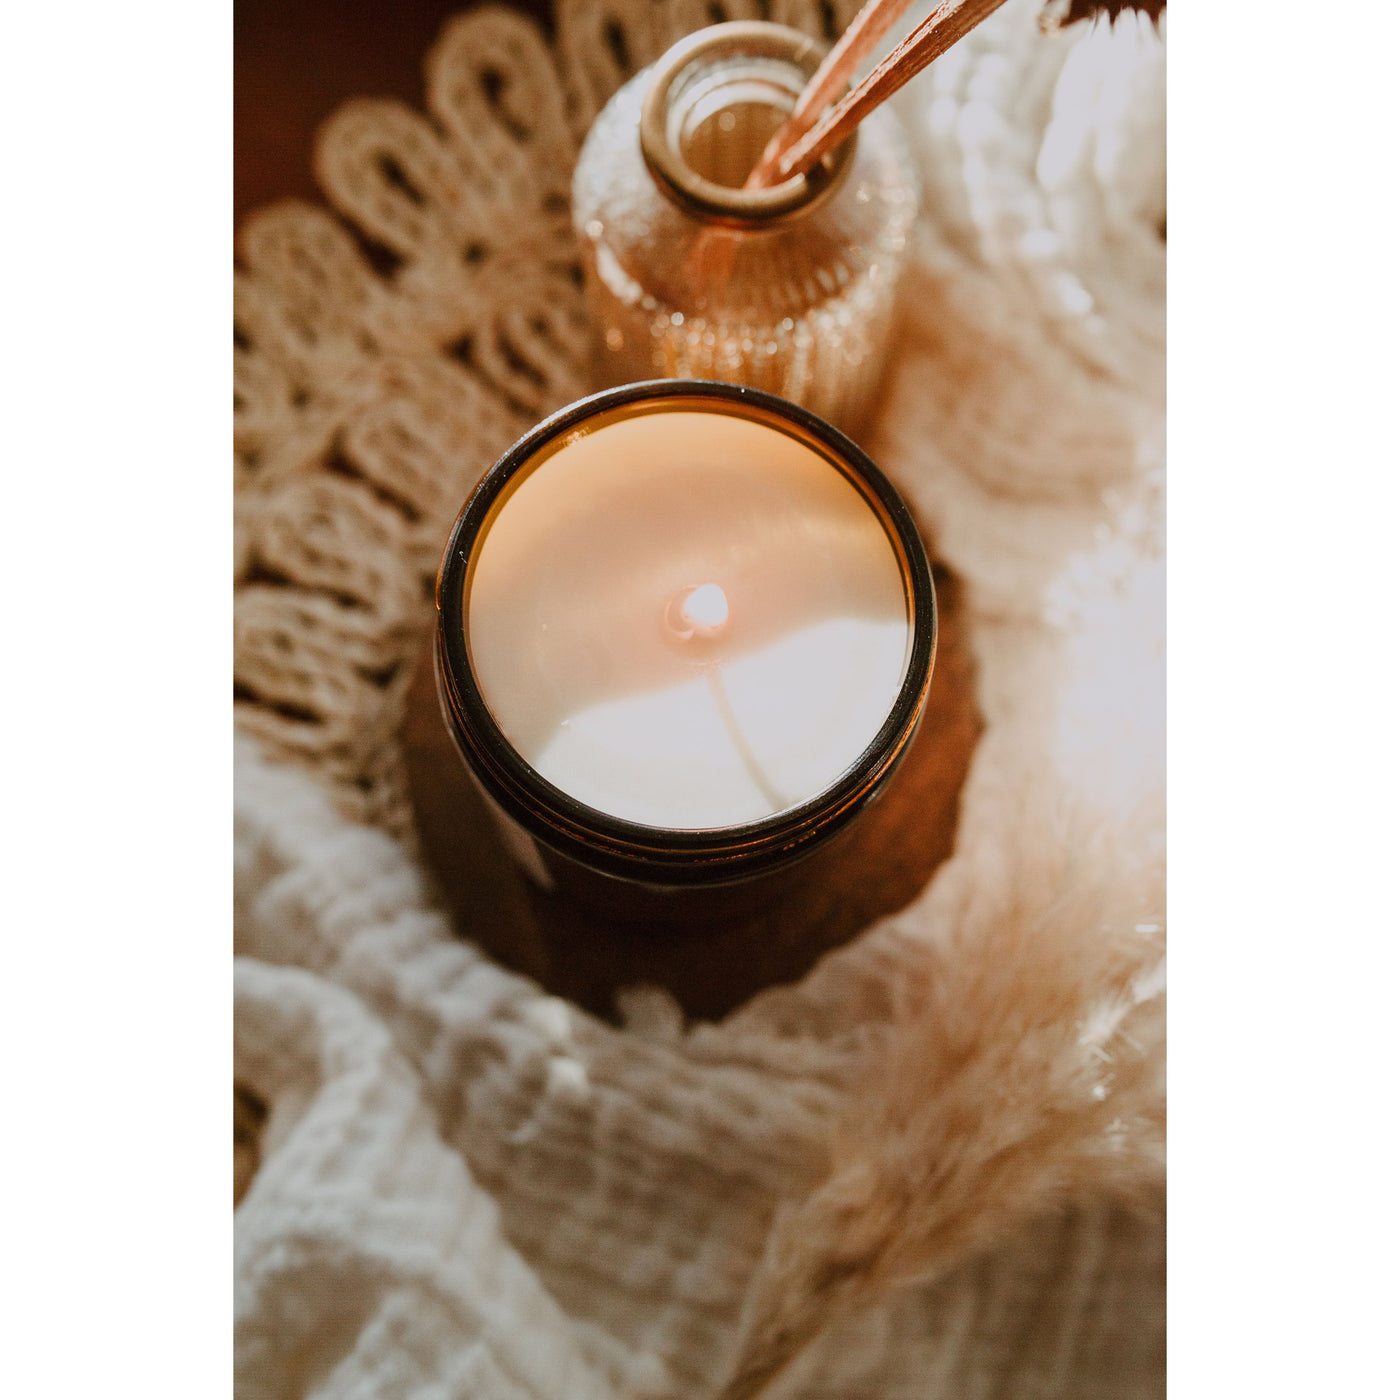 Peach Nectar - Scented Soy Candle - Almira Creations